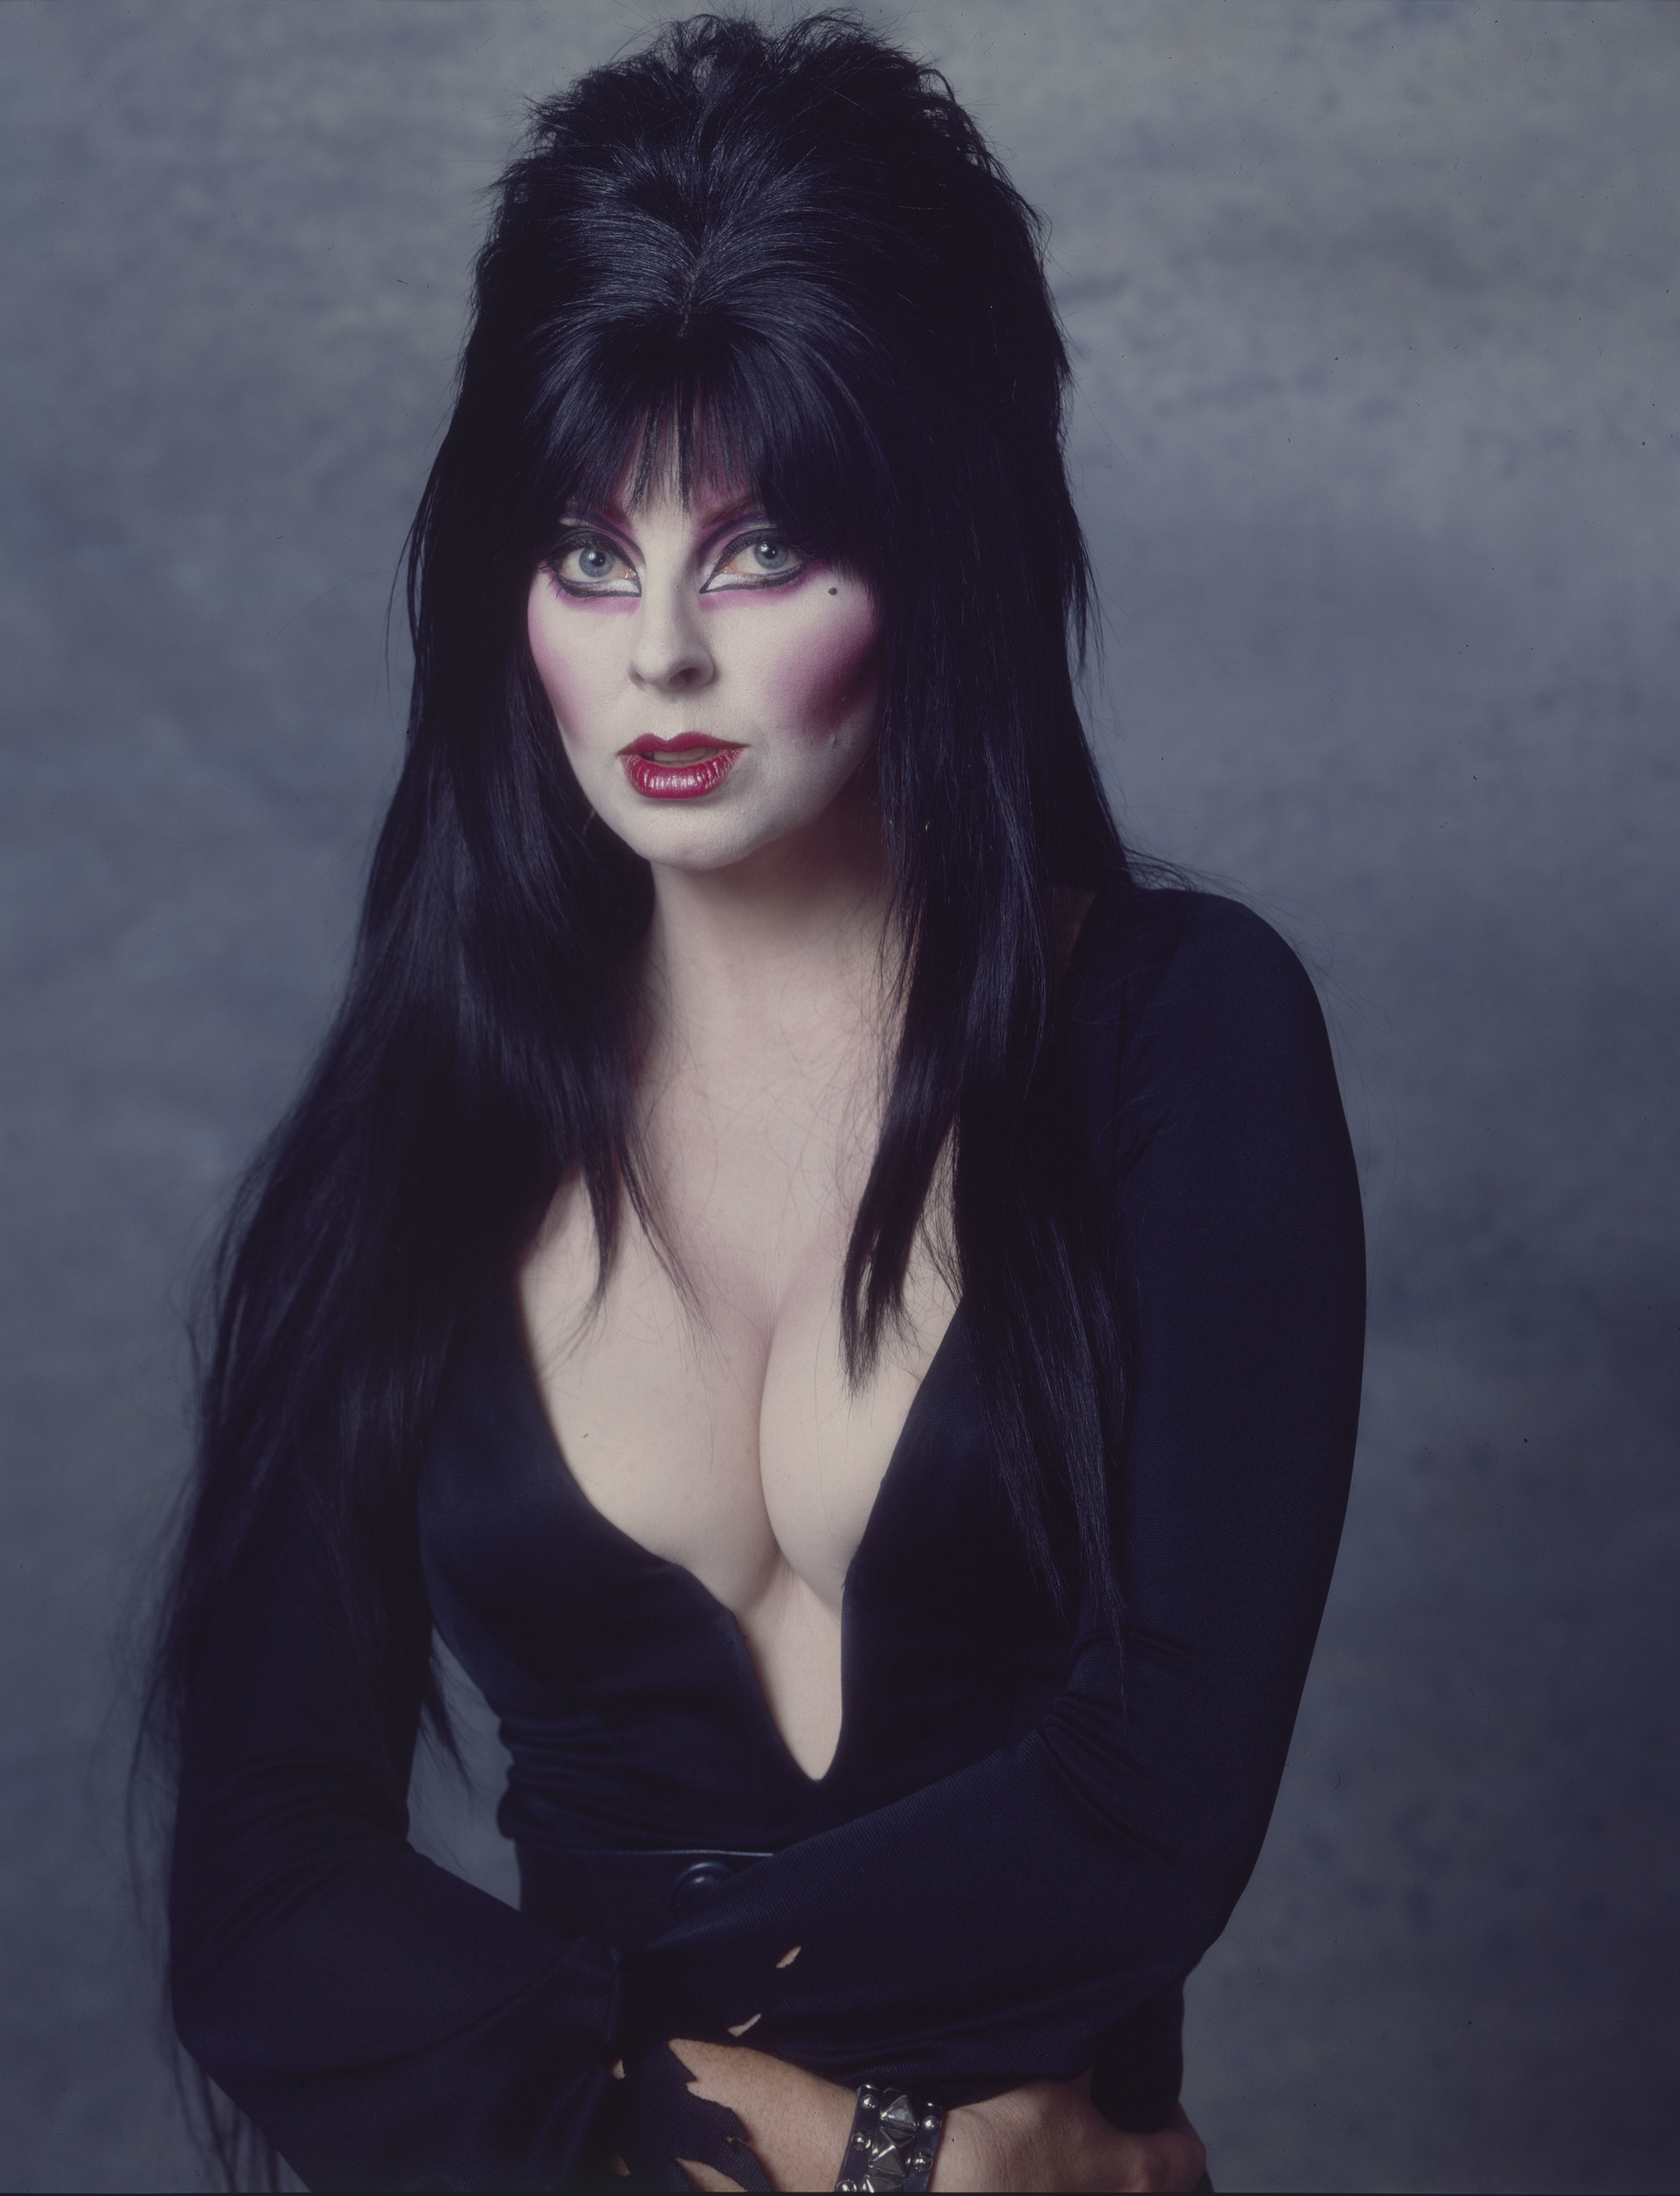 in her dark makeup and campy elvira outfit